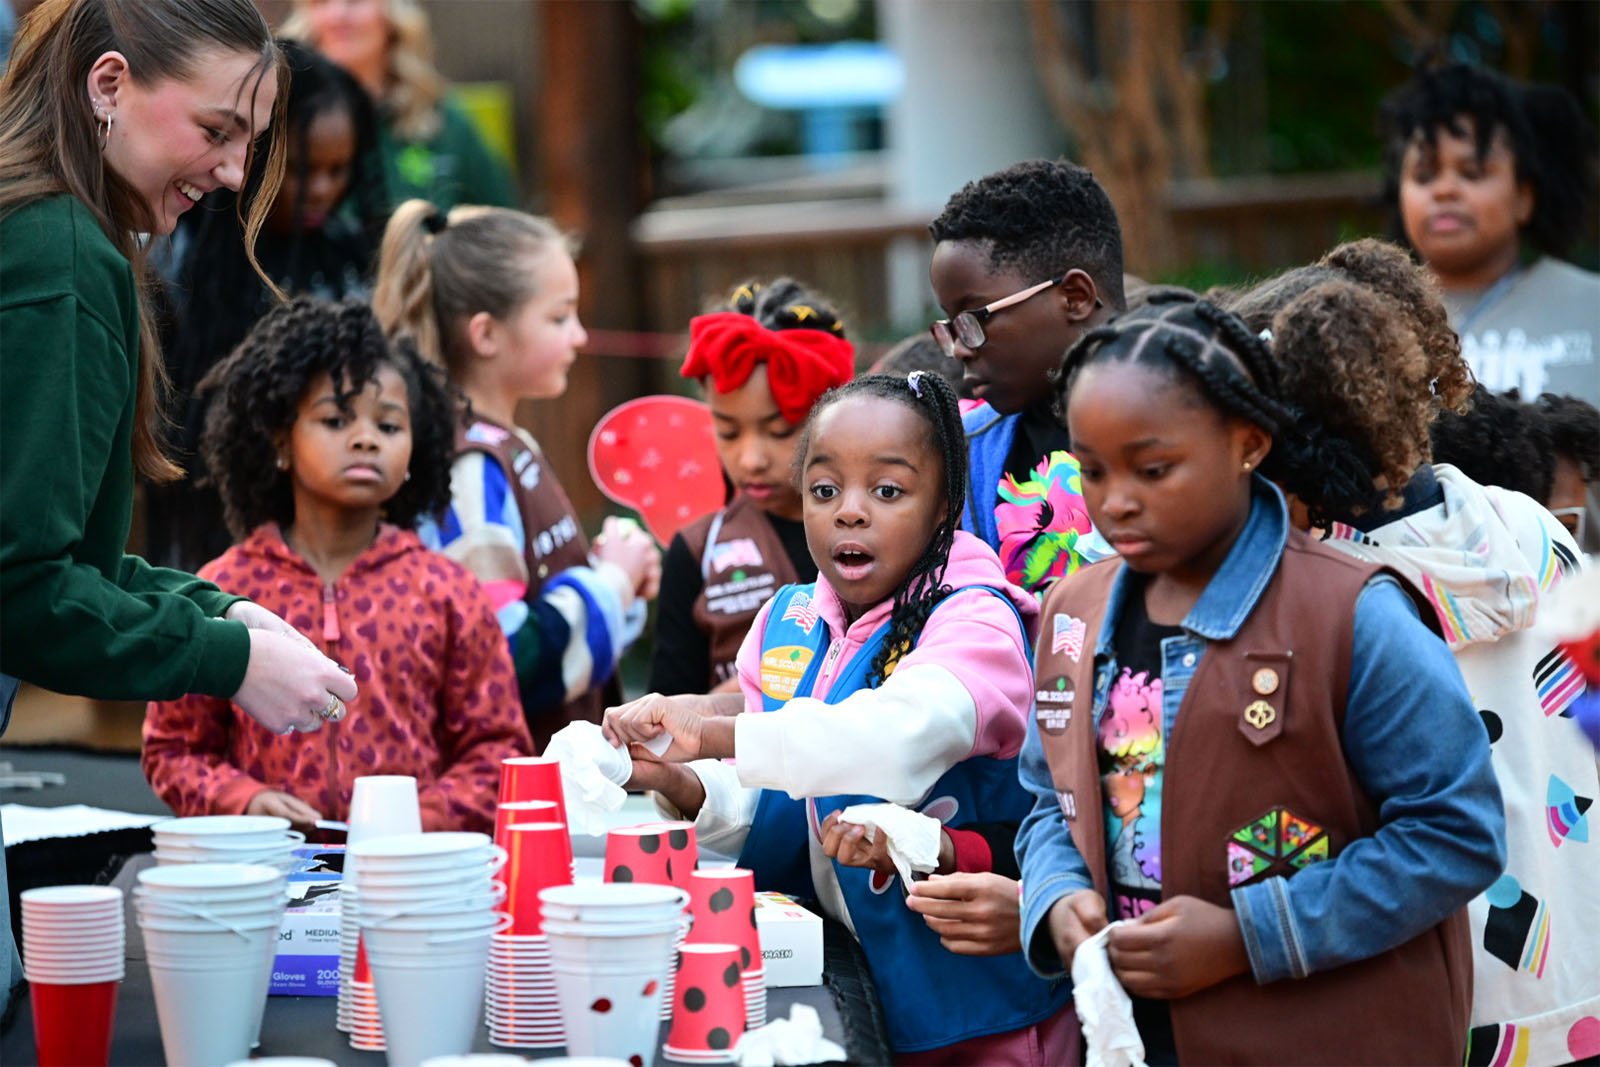 A group of excited children, some wearing scout uniforms, gather around a table with cups as a smiling woman assists them during an outdoor event.